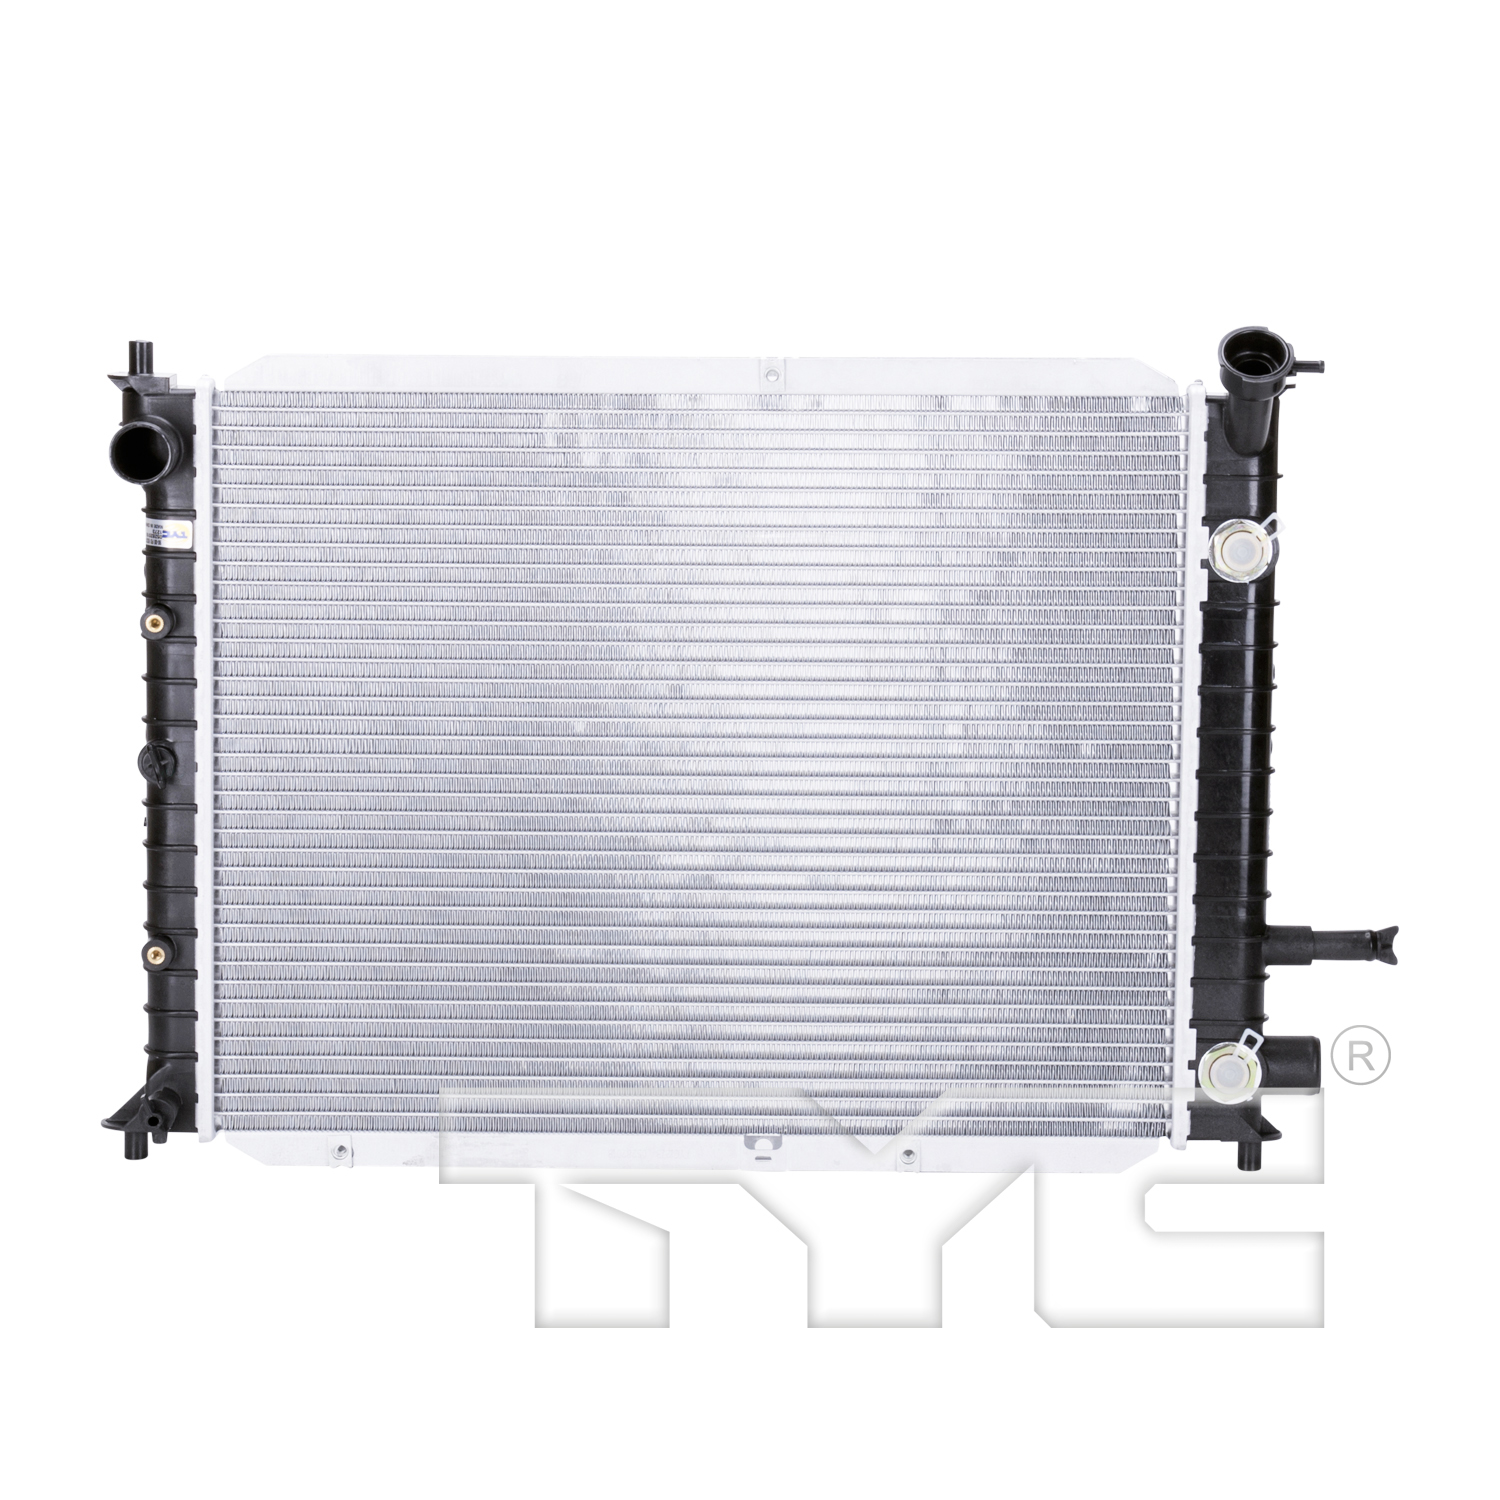 Aftermarket RADIATORS for MERCURY - TRACER, TRACER,91-99,Radiator assembly